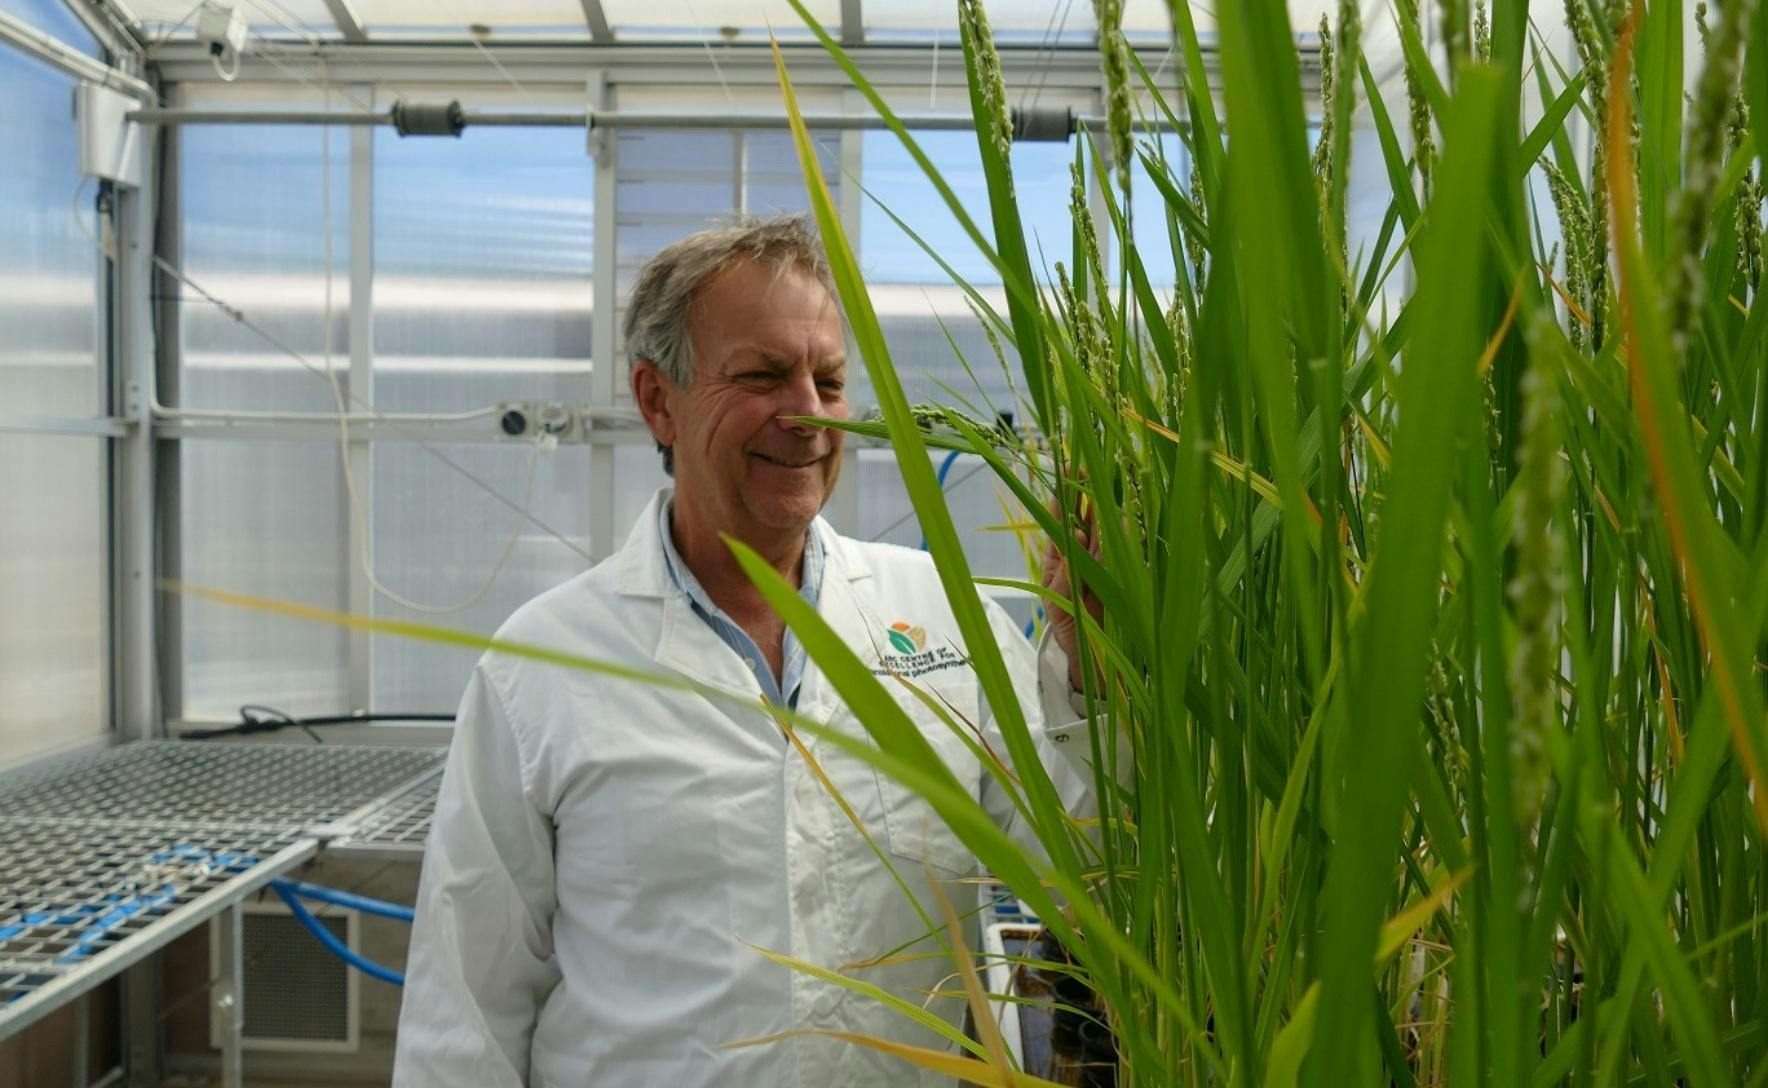 Bob Furbank wears a white lab coat and stands in a greenhouse. He is smiling and looking at long green grass shoots.